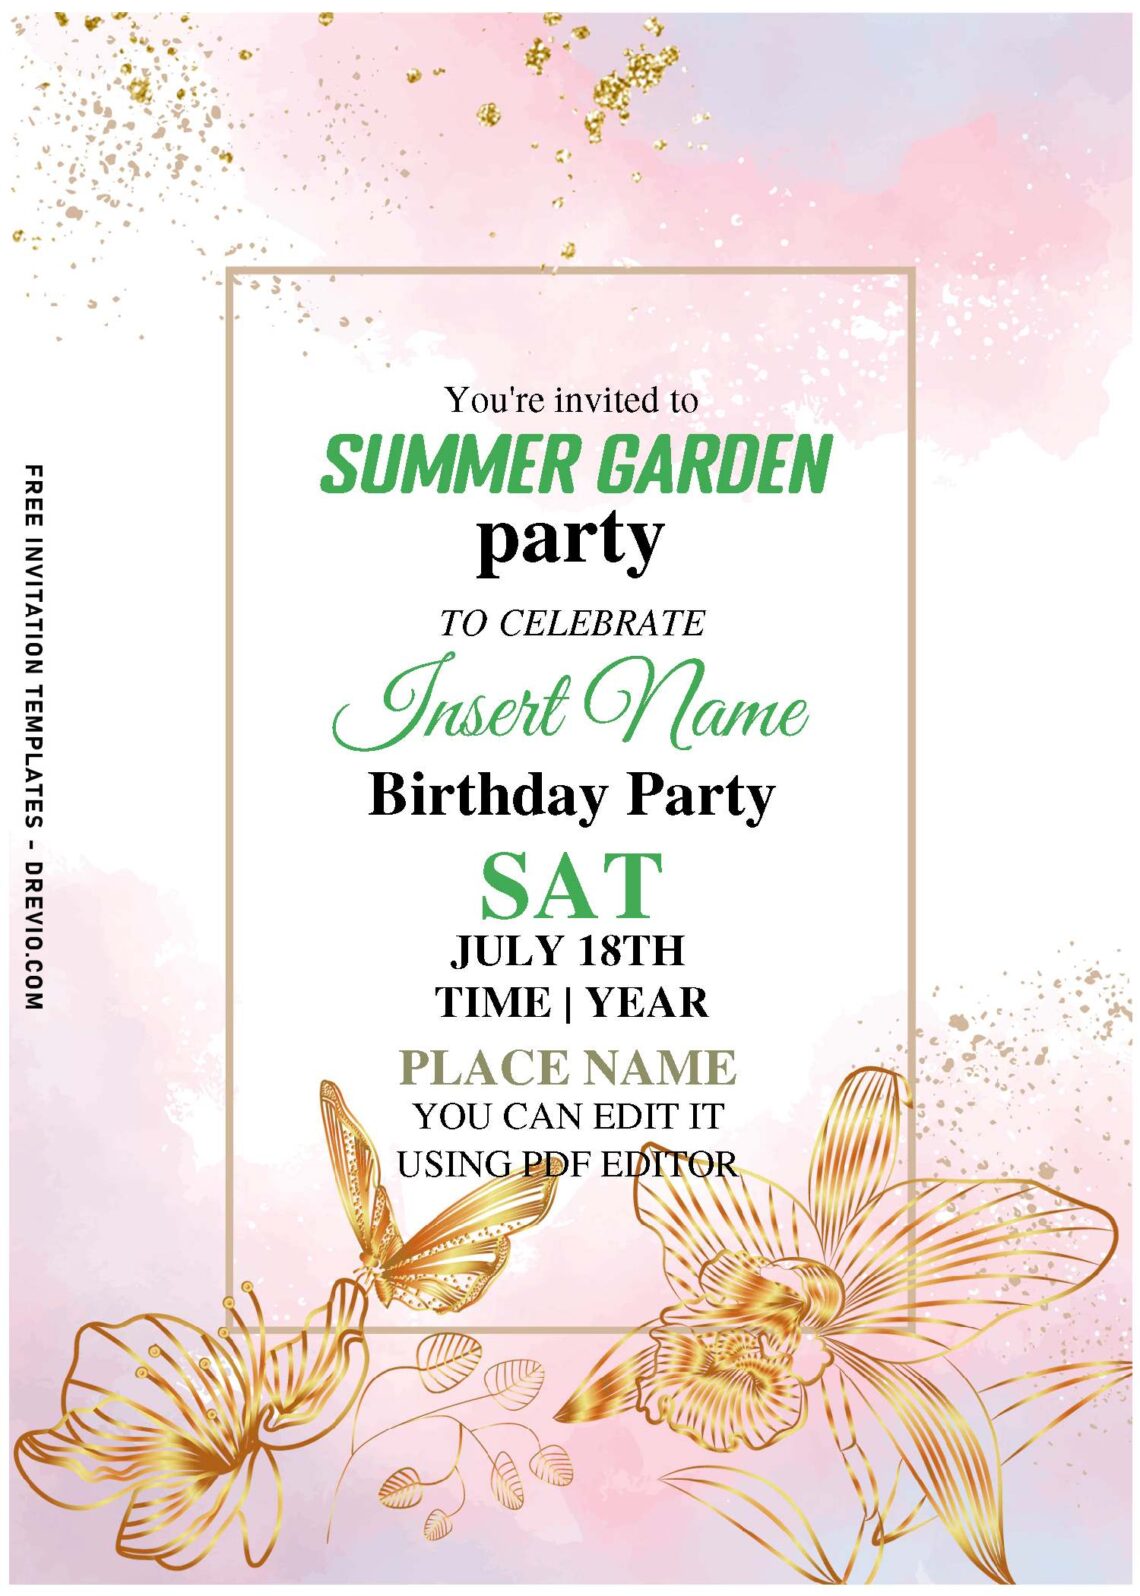 (Free Editable PDF) Dreamy Magical Butterfly Flower Birthday Invitation Templates with enchanting gold butterflies